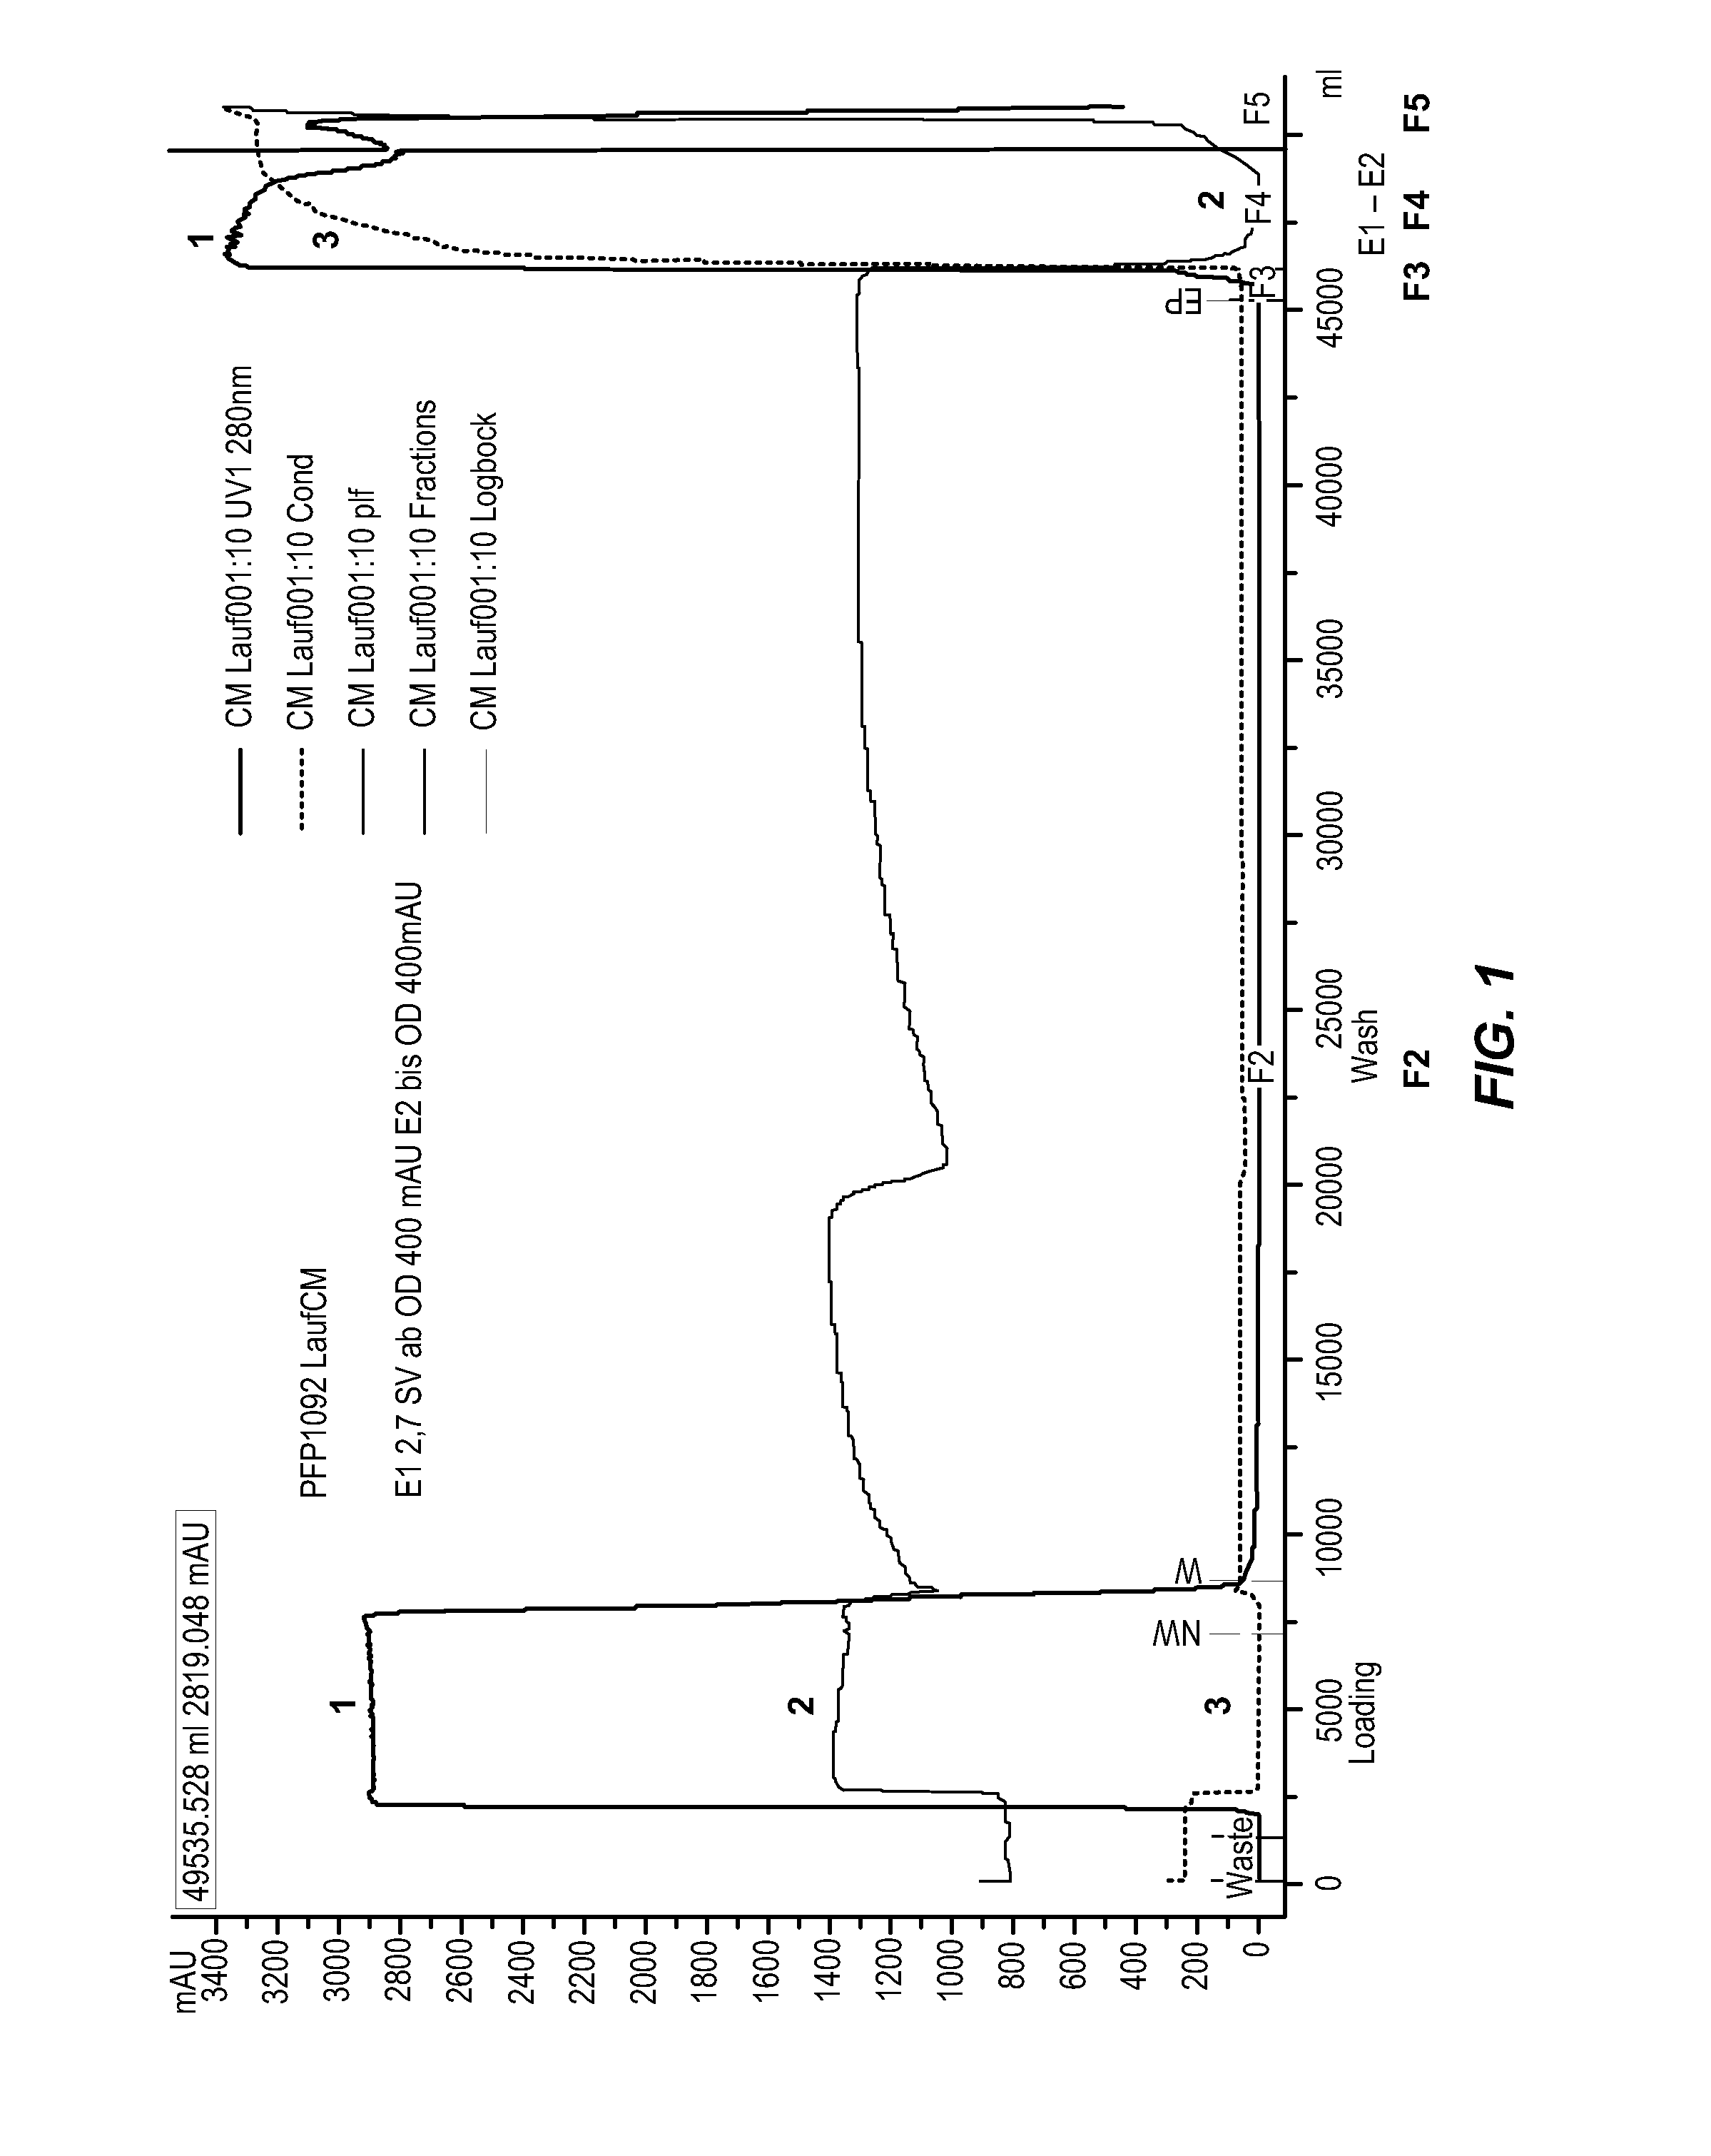 Method for reducing the thromboembolic potential of a plasma-derived immunoglobulin composition